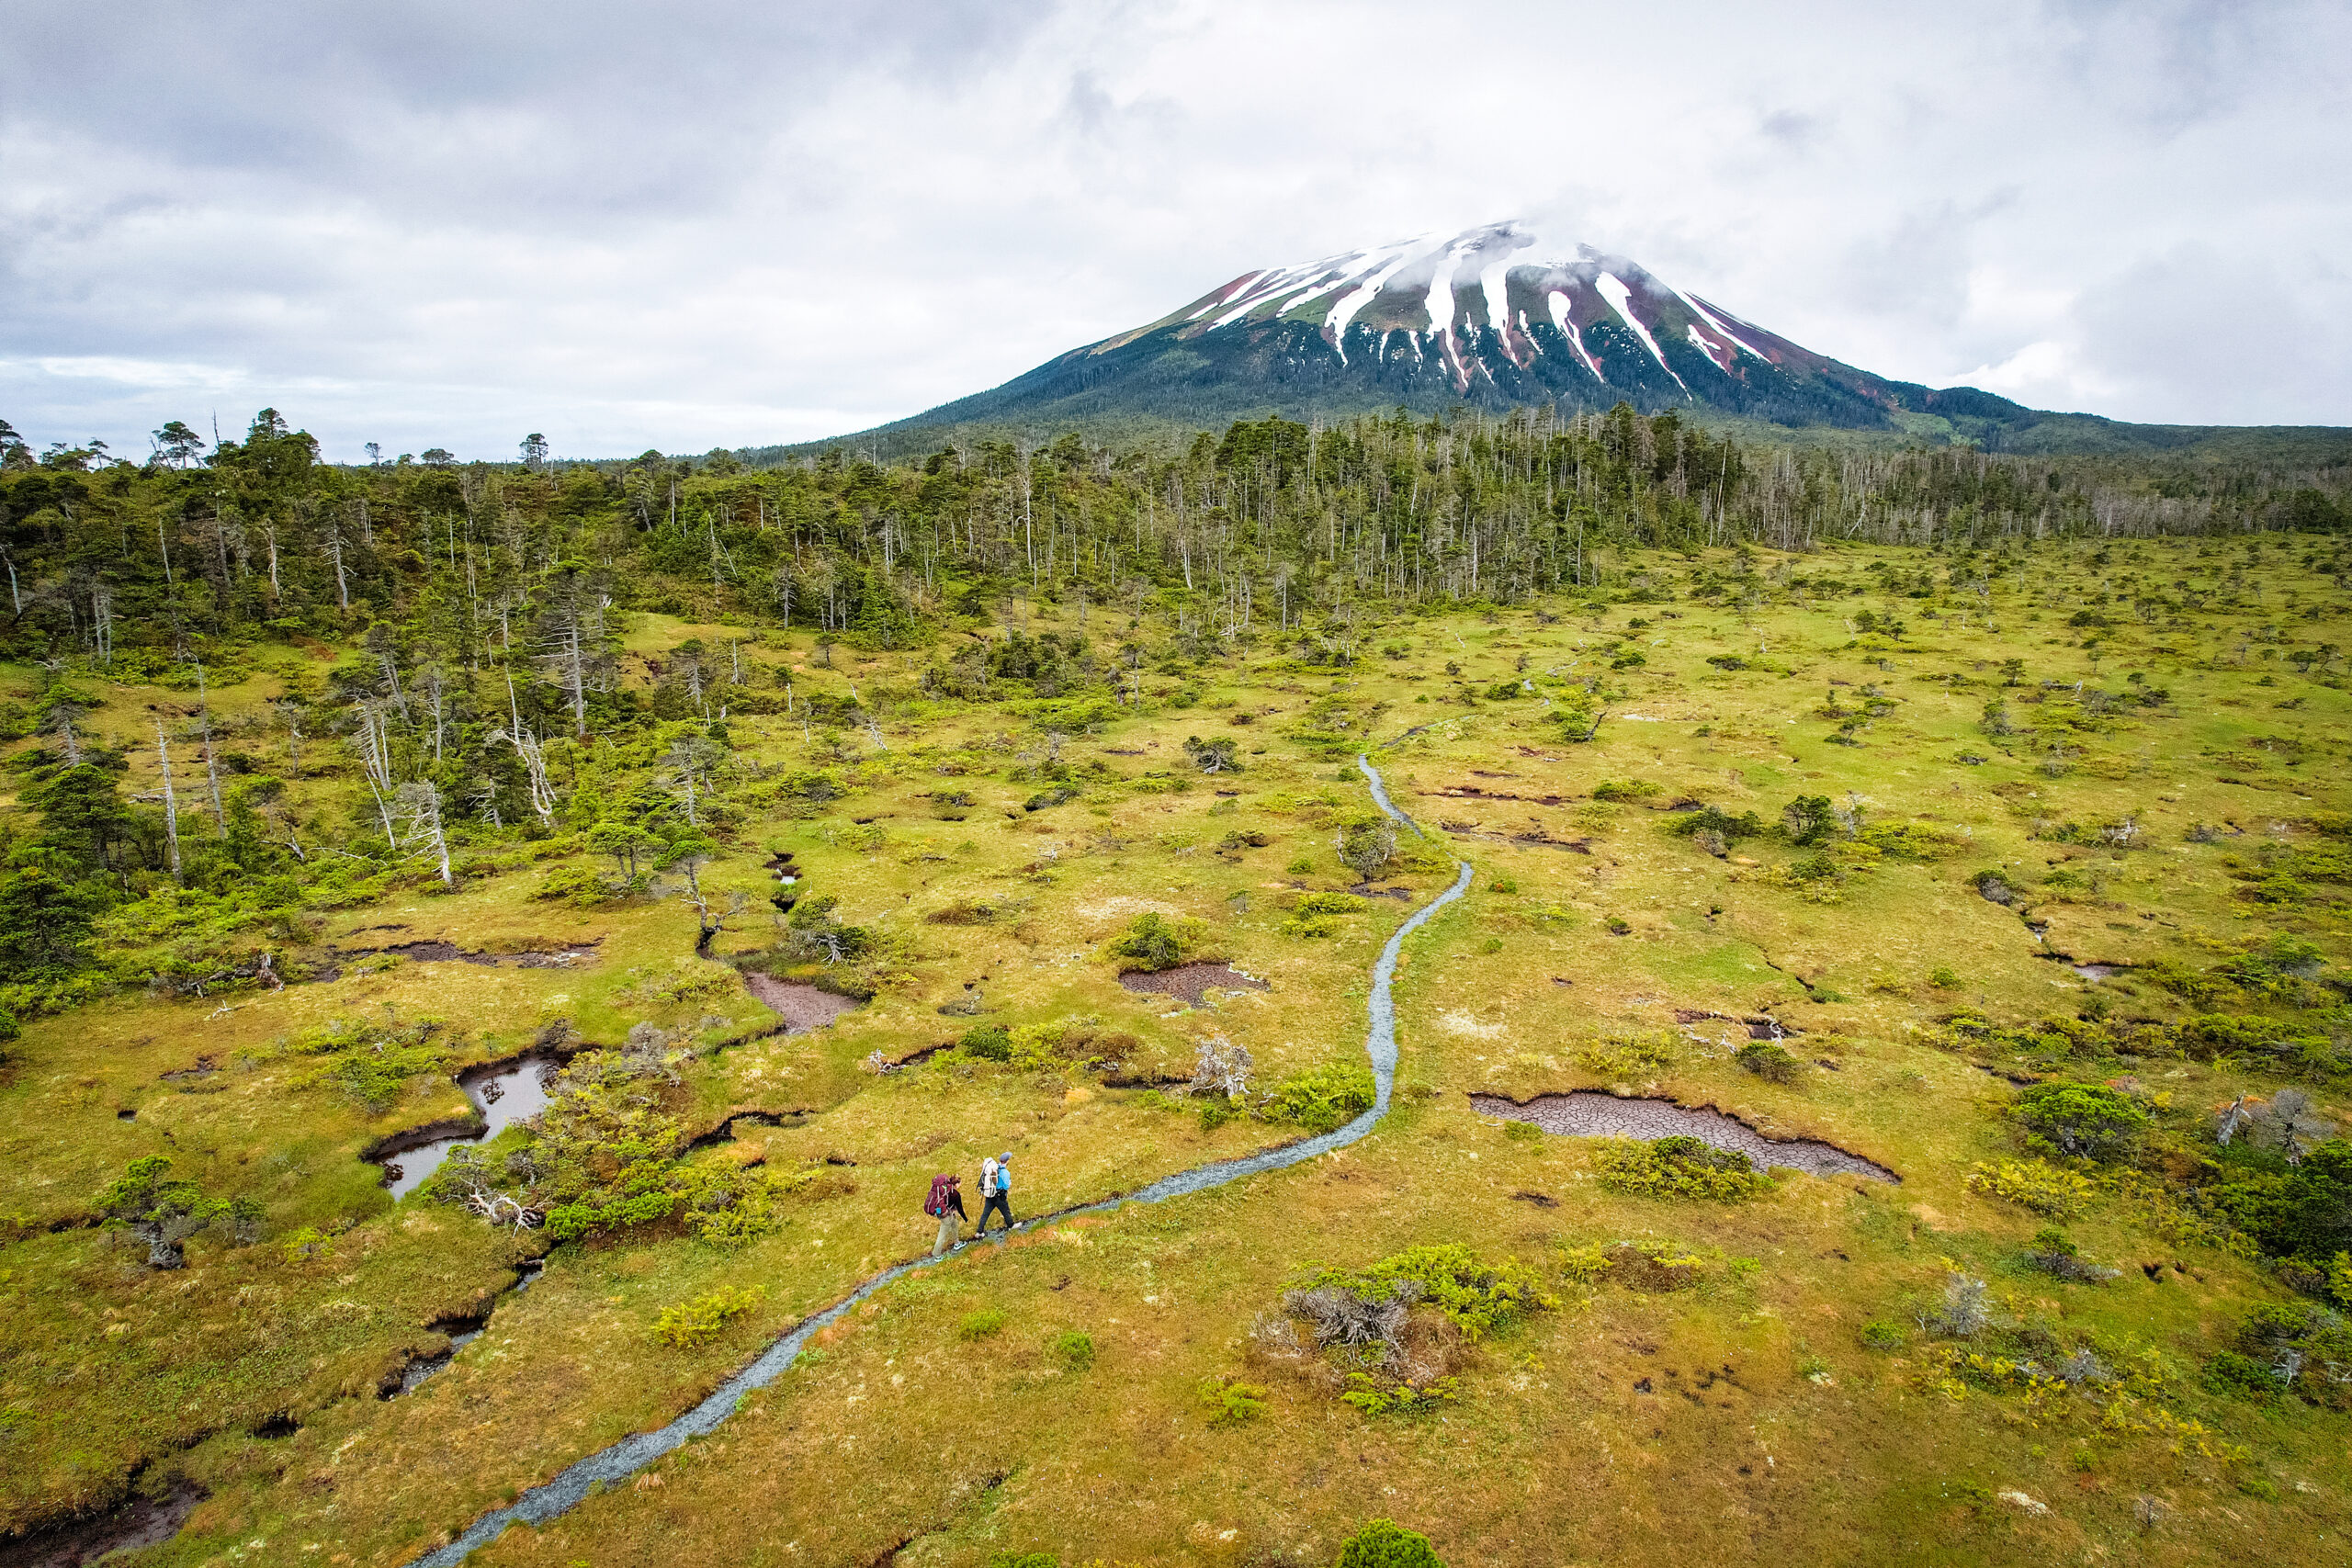 A drone photo from above of the Mt. Edgecumbe trail winding through the muskeg on the way to the volcano.